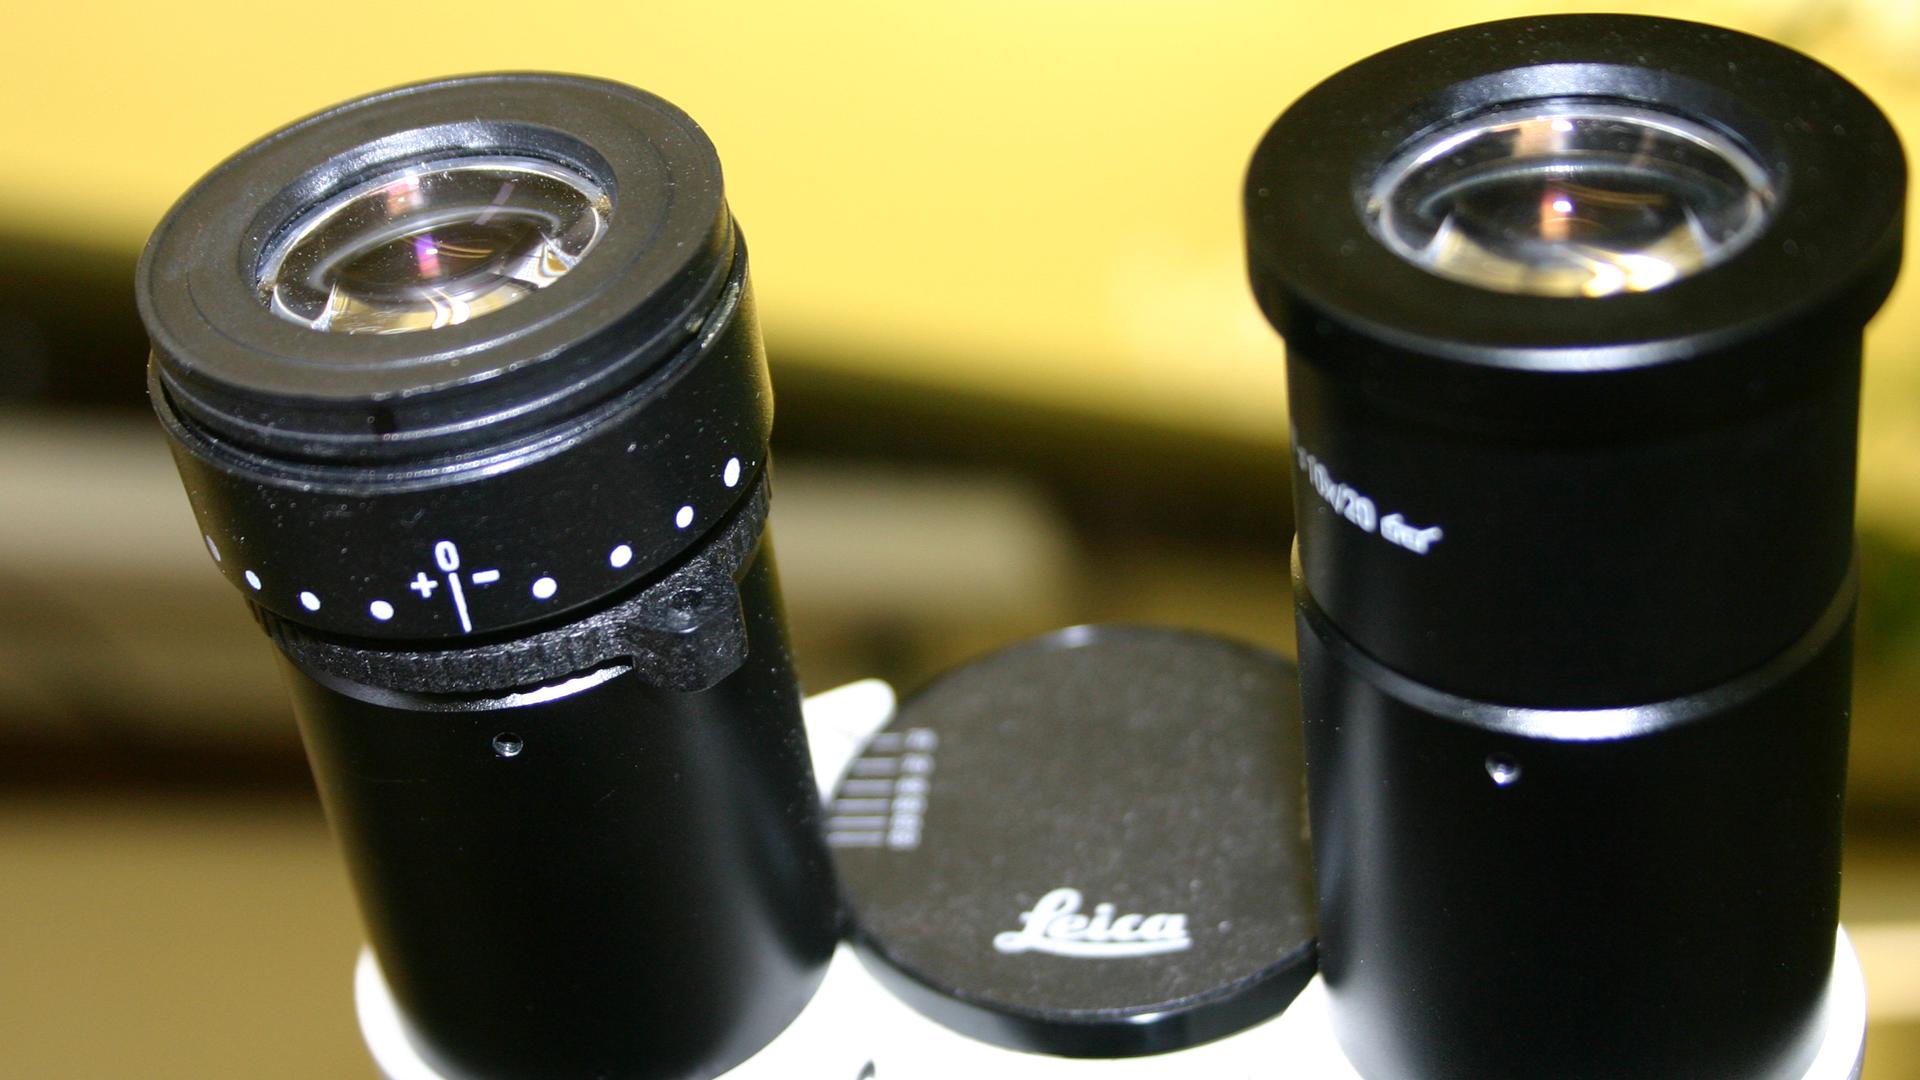 View of oculars of the Leica microscope used in General Botany taught at the University of Wisconsin-Madison.